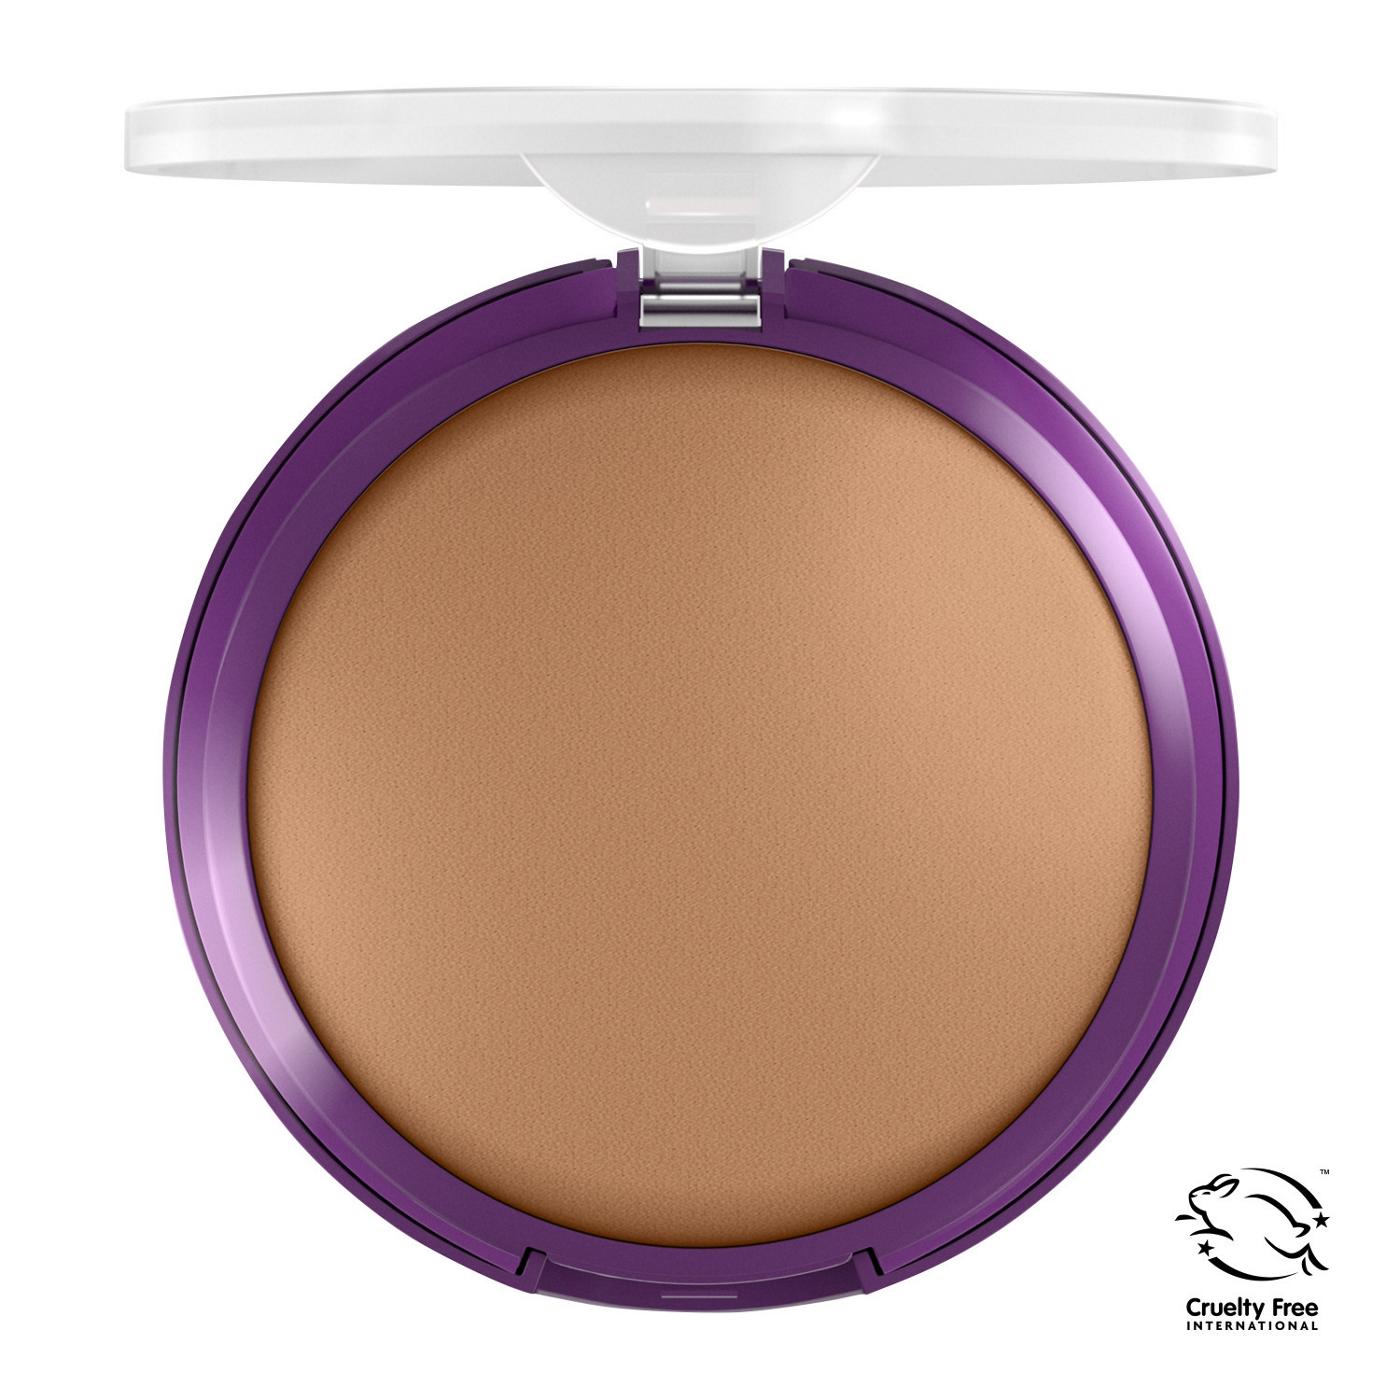 Covergirl Simply Ageless Pressed Powder 255 Soft Honey; image 8 of 10